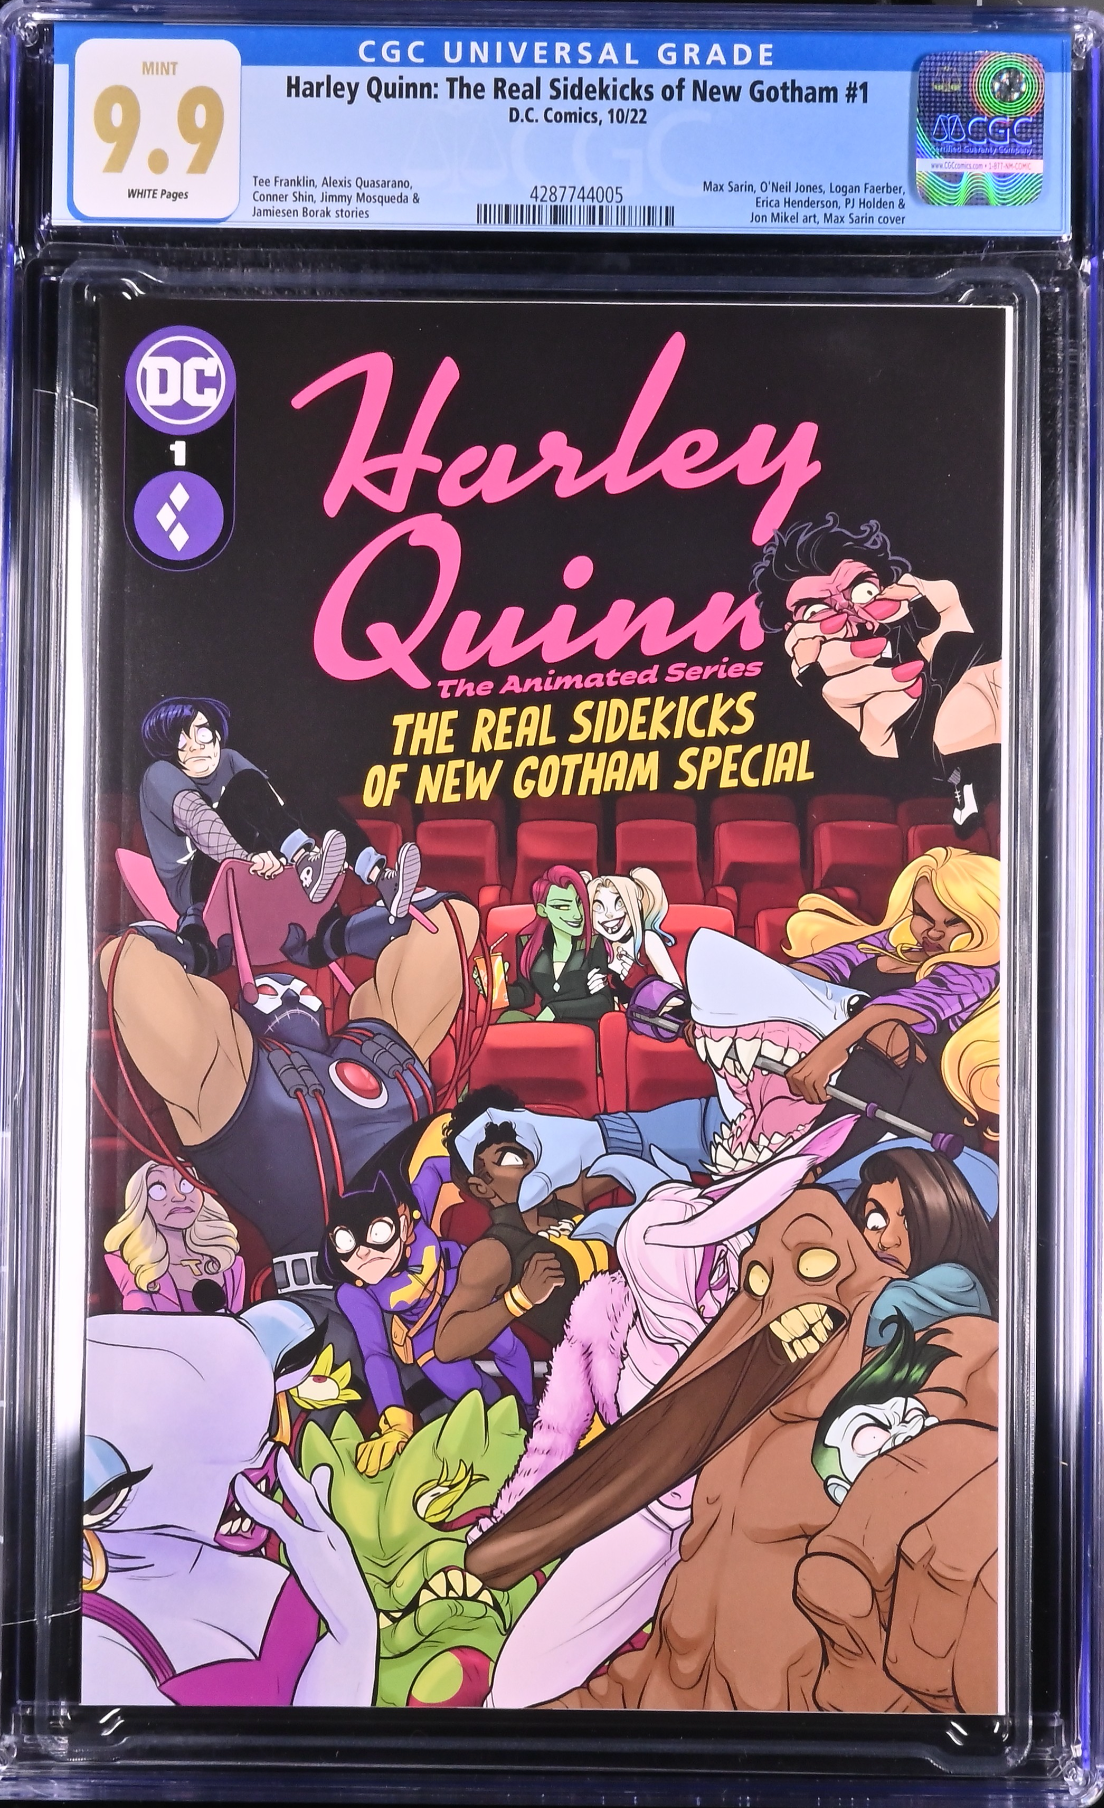 Harley Quinn: The Animated Series - The Real Sidekicks of New Gotham Special #1 CGC 9.9